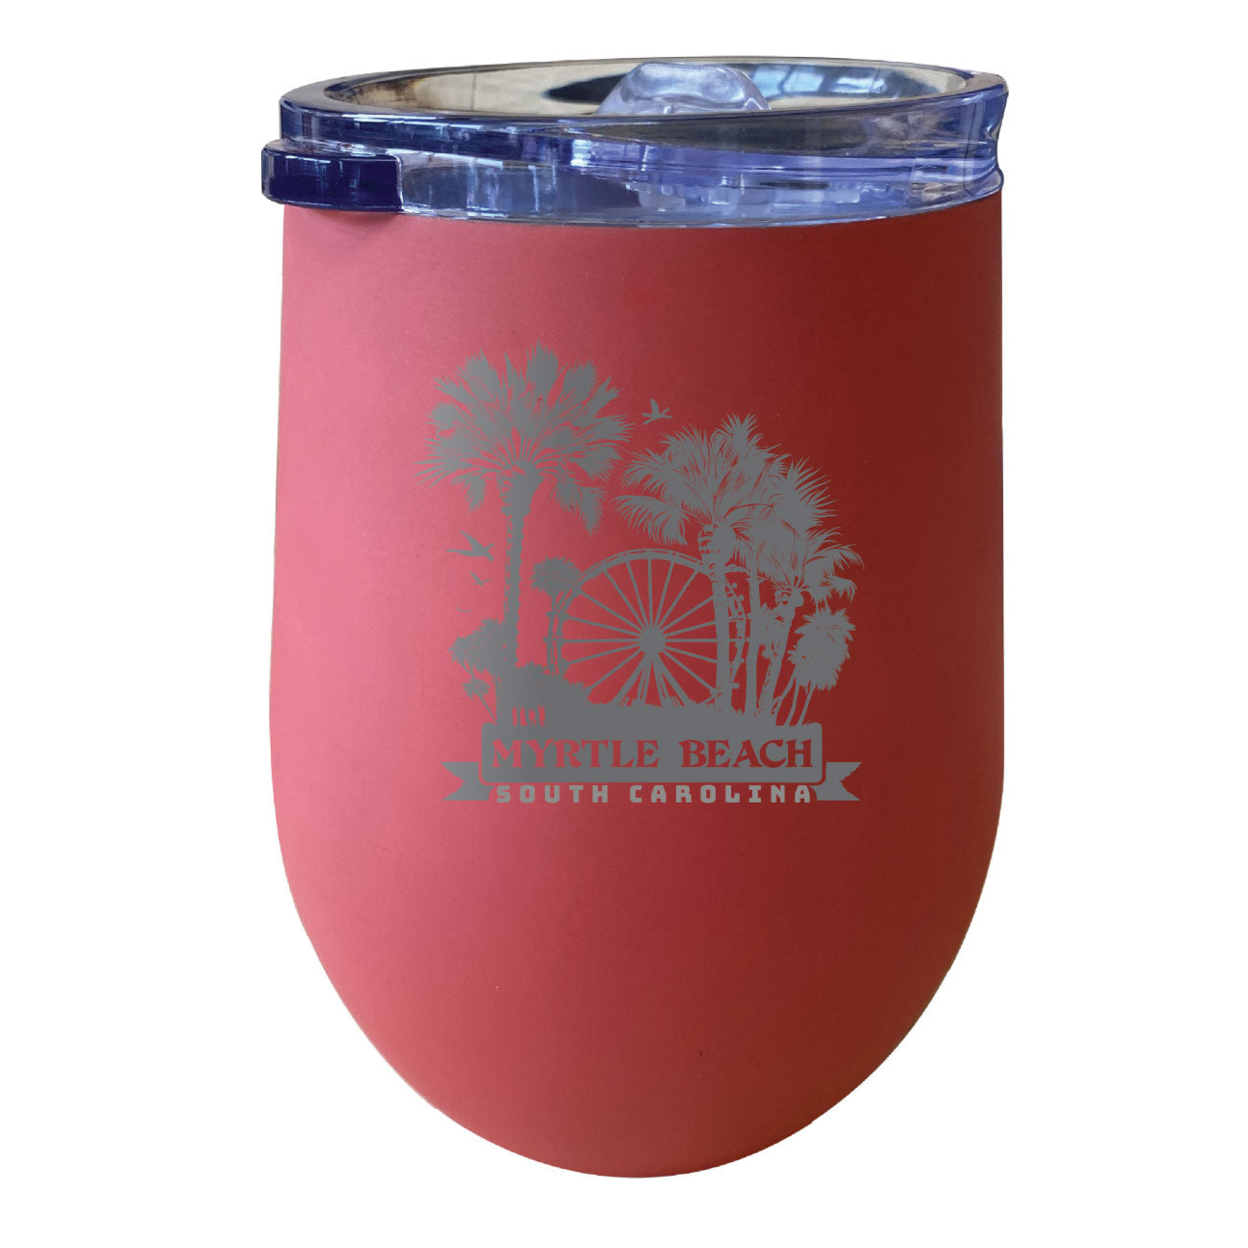 Myrtle Beach South Carolina Laser Etched Souvenir 12 Oz Insulated Wine Stainless Steel Tumbler - Coral